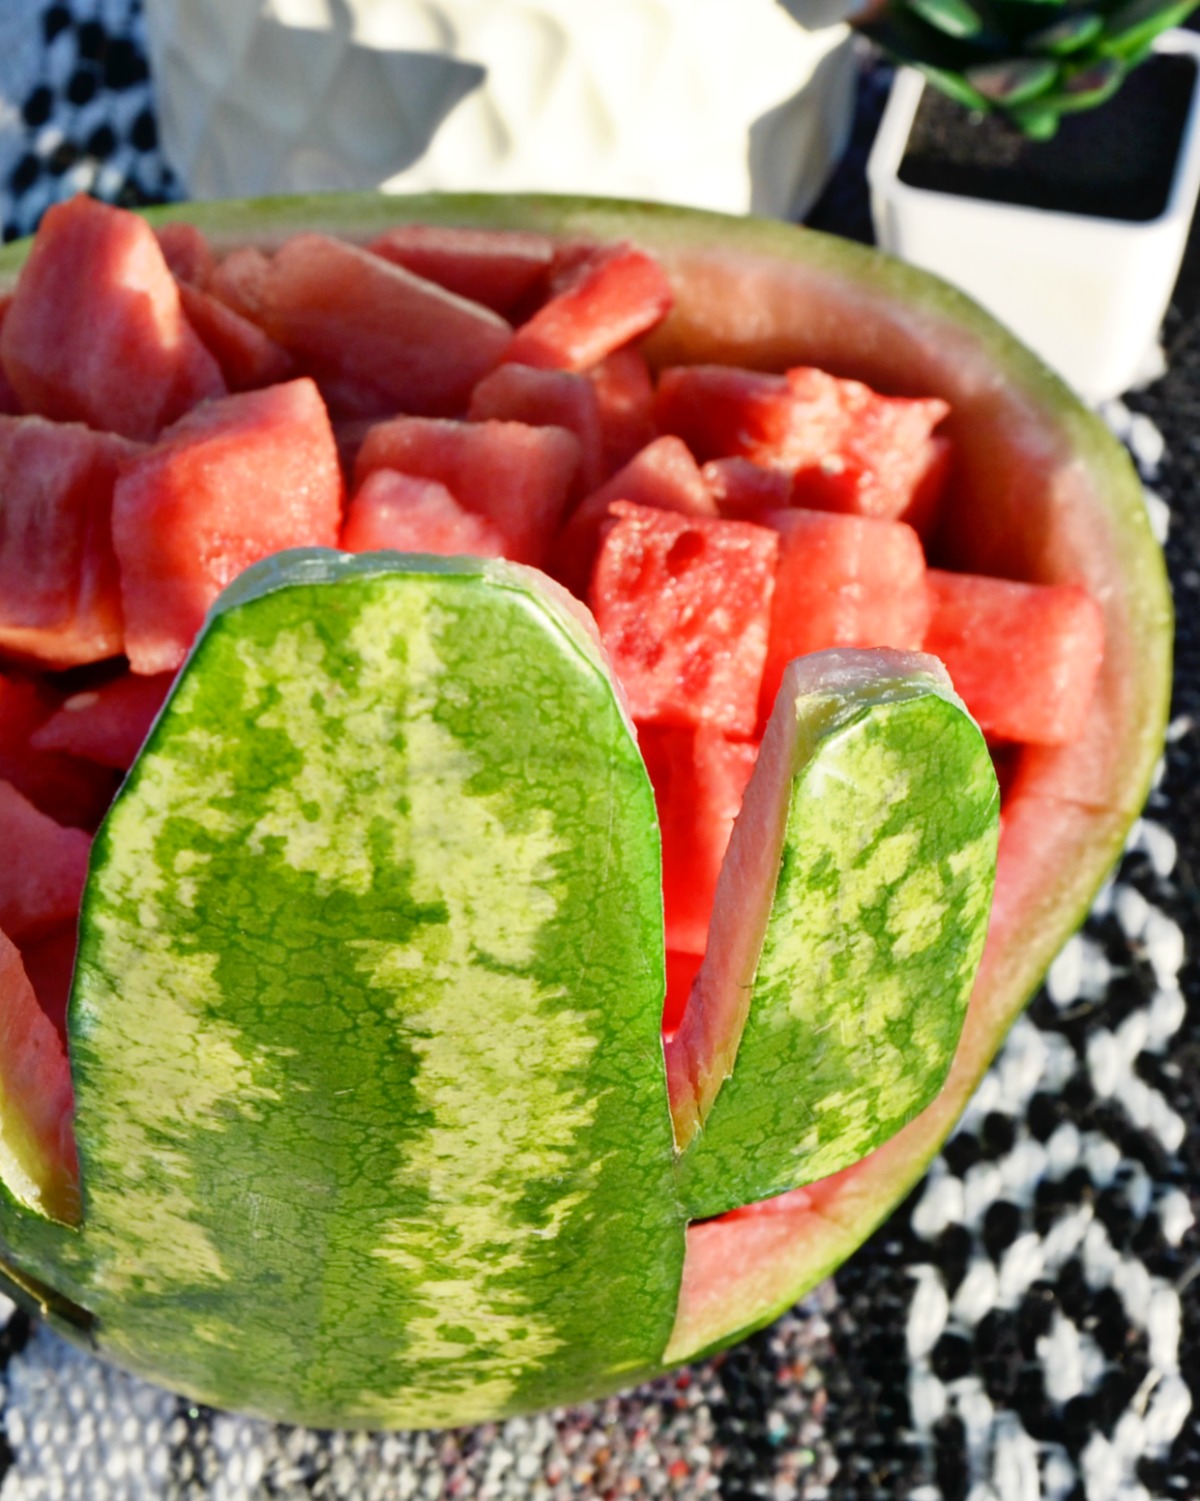 See how easy it is to carve your watermelon into a saguaro cactus watermelon bowl!